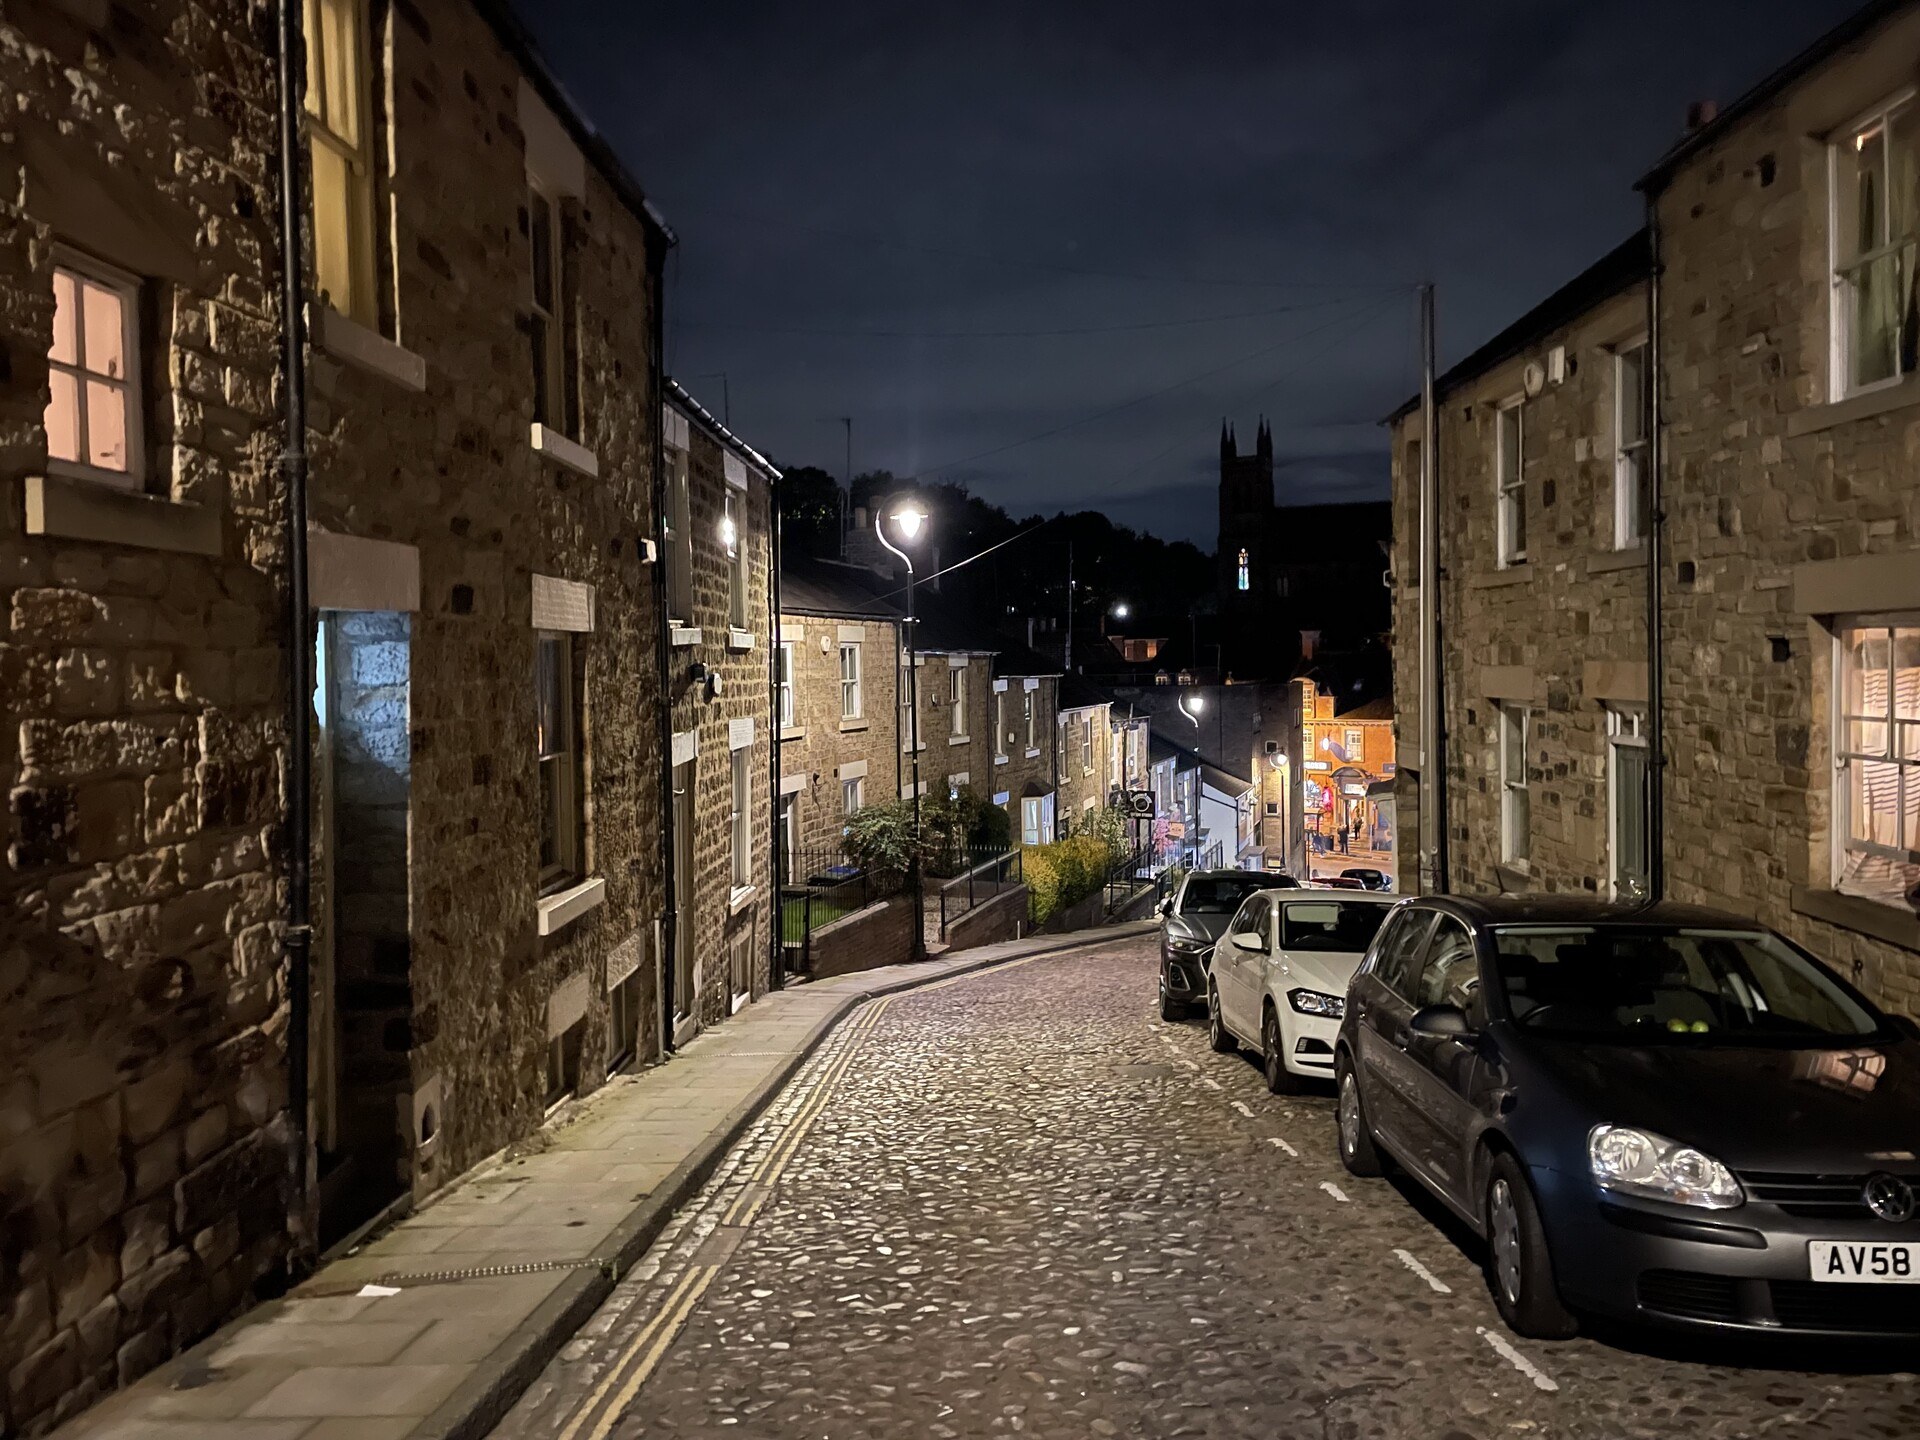 Looking down a picturesque cobblestoned street in Durham, at night